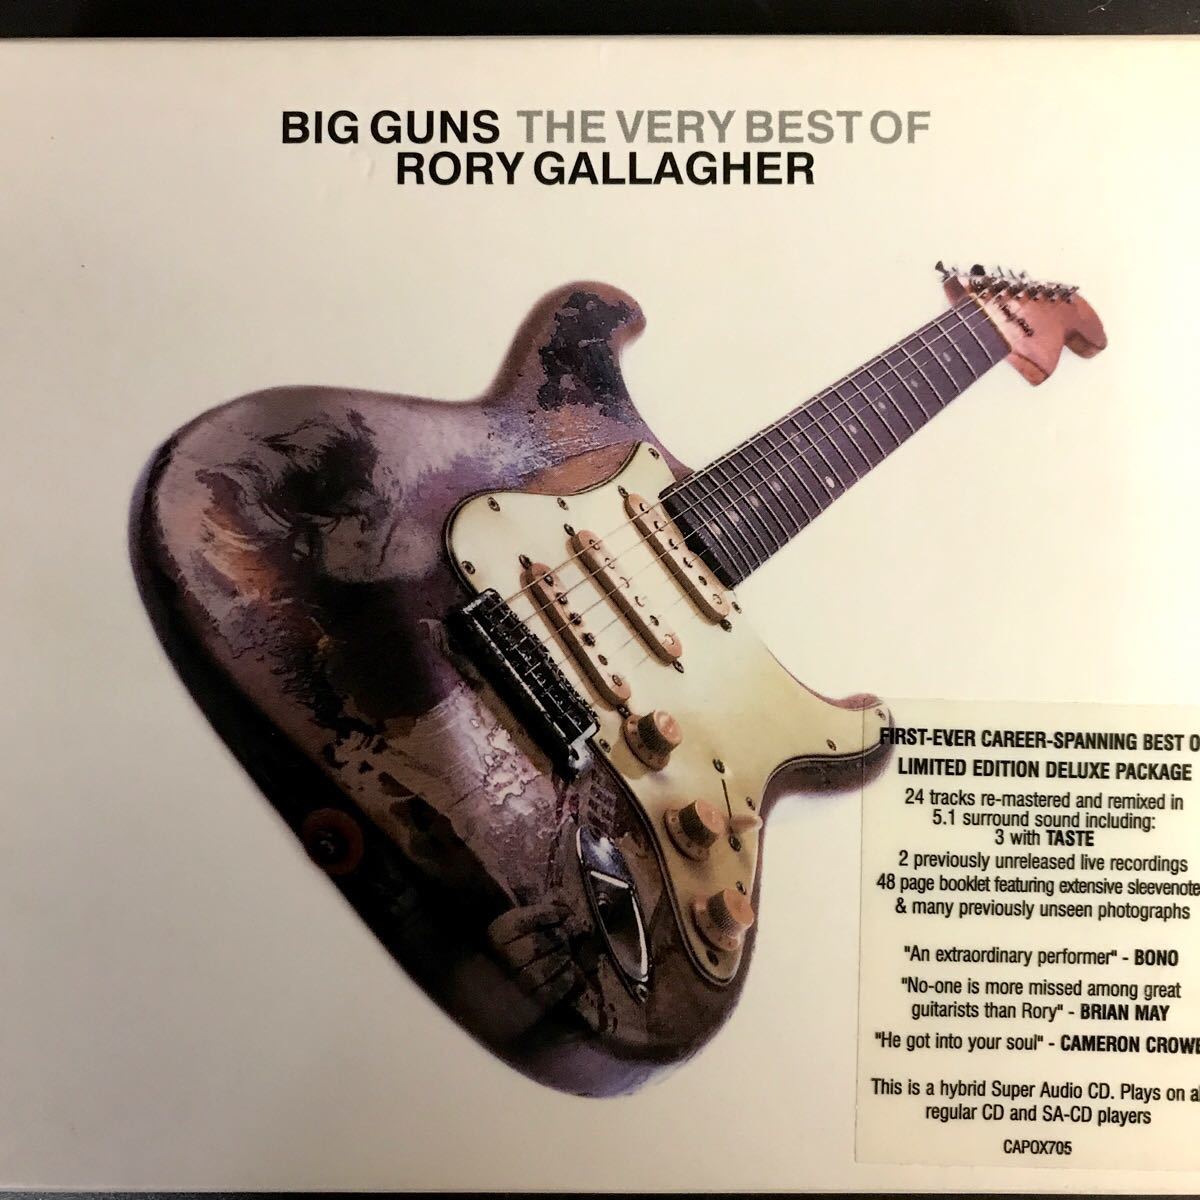 THE VERY BEST OF RORY GALLAGHER/BIG GUNS 2CD